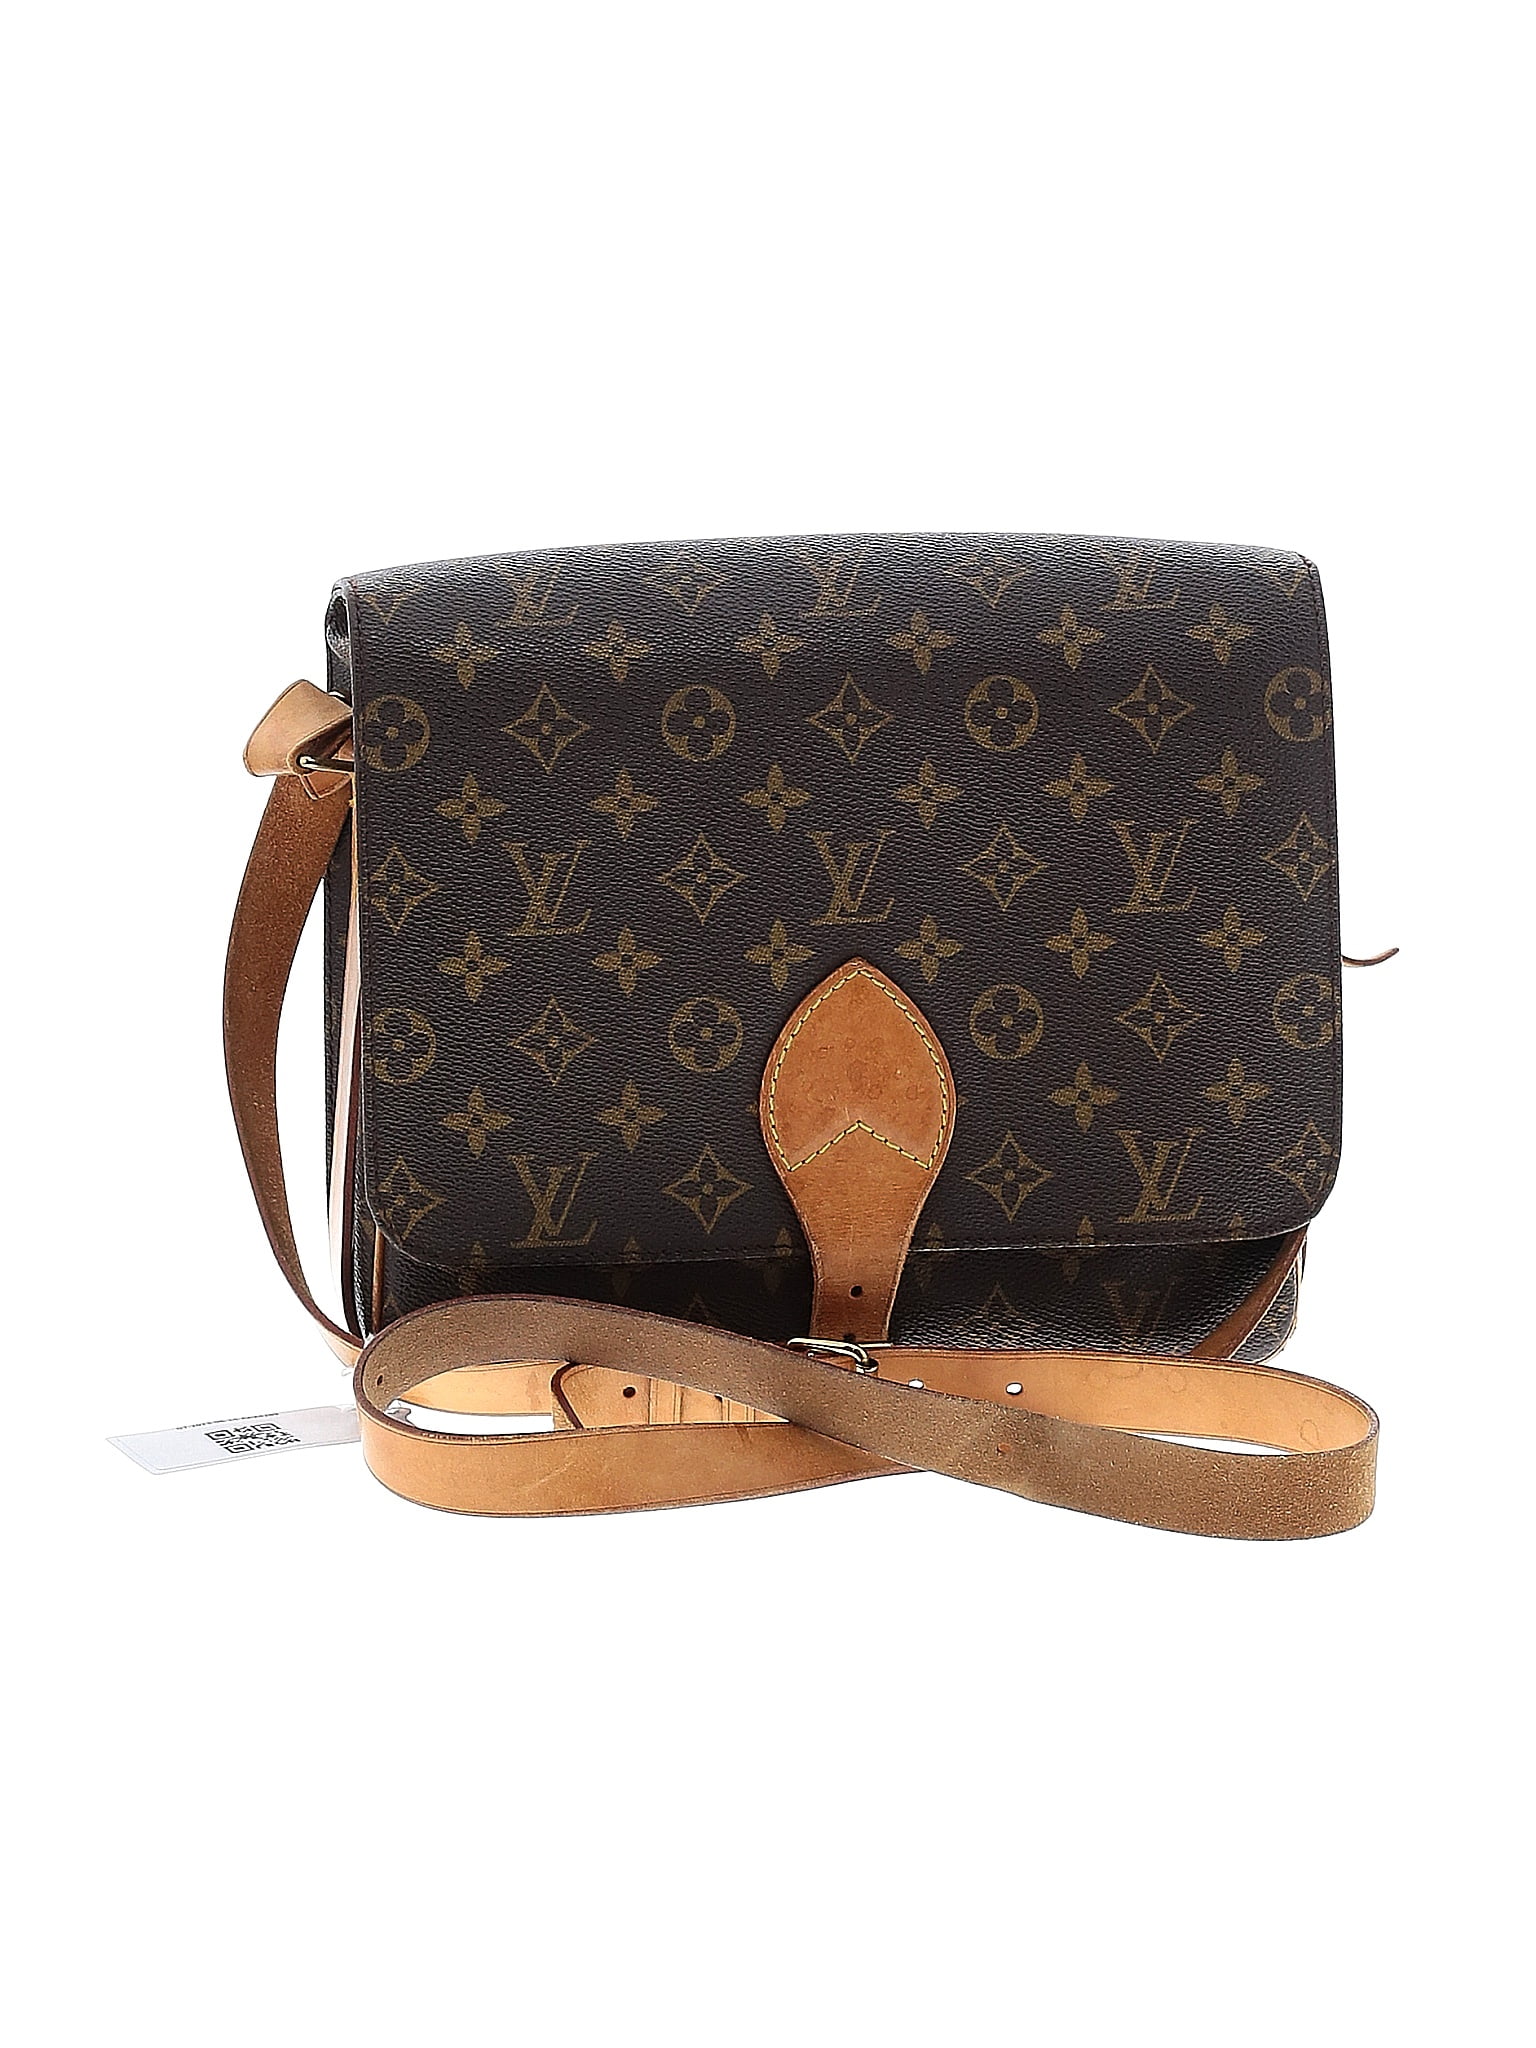 Preowned Louis Vuitton Cartouchiere MM Crossbody